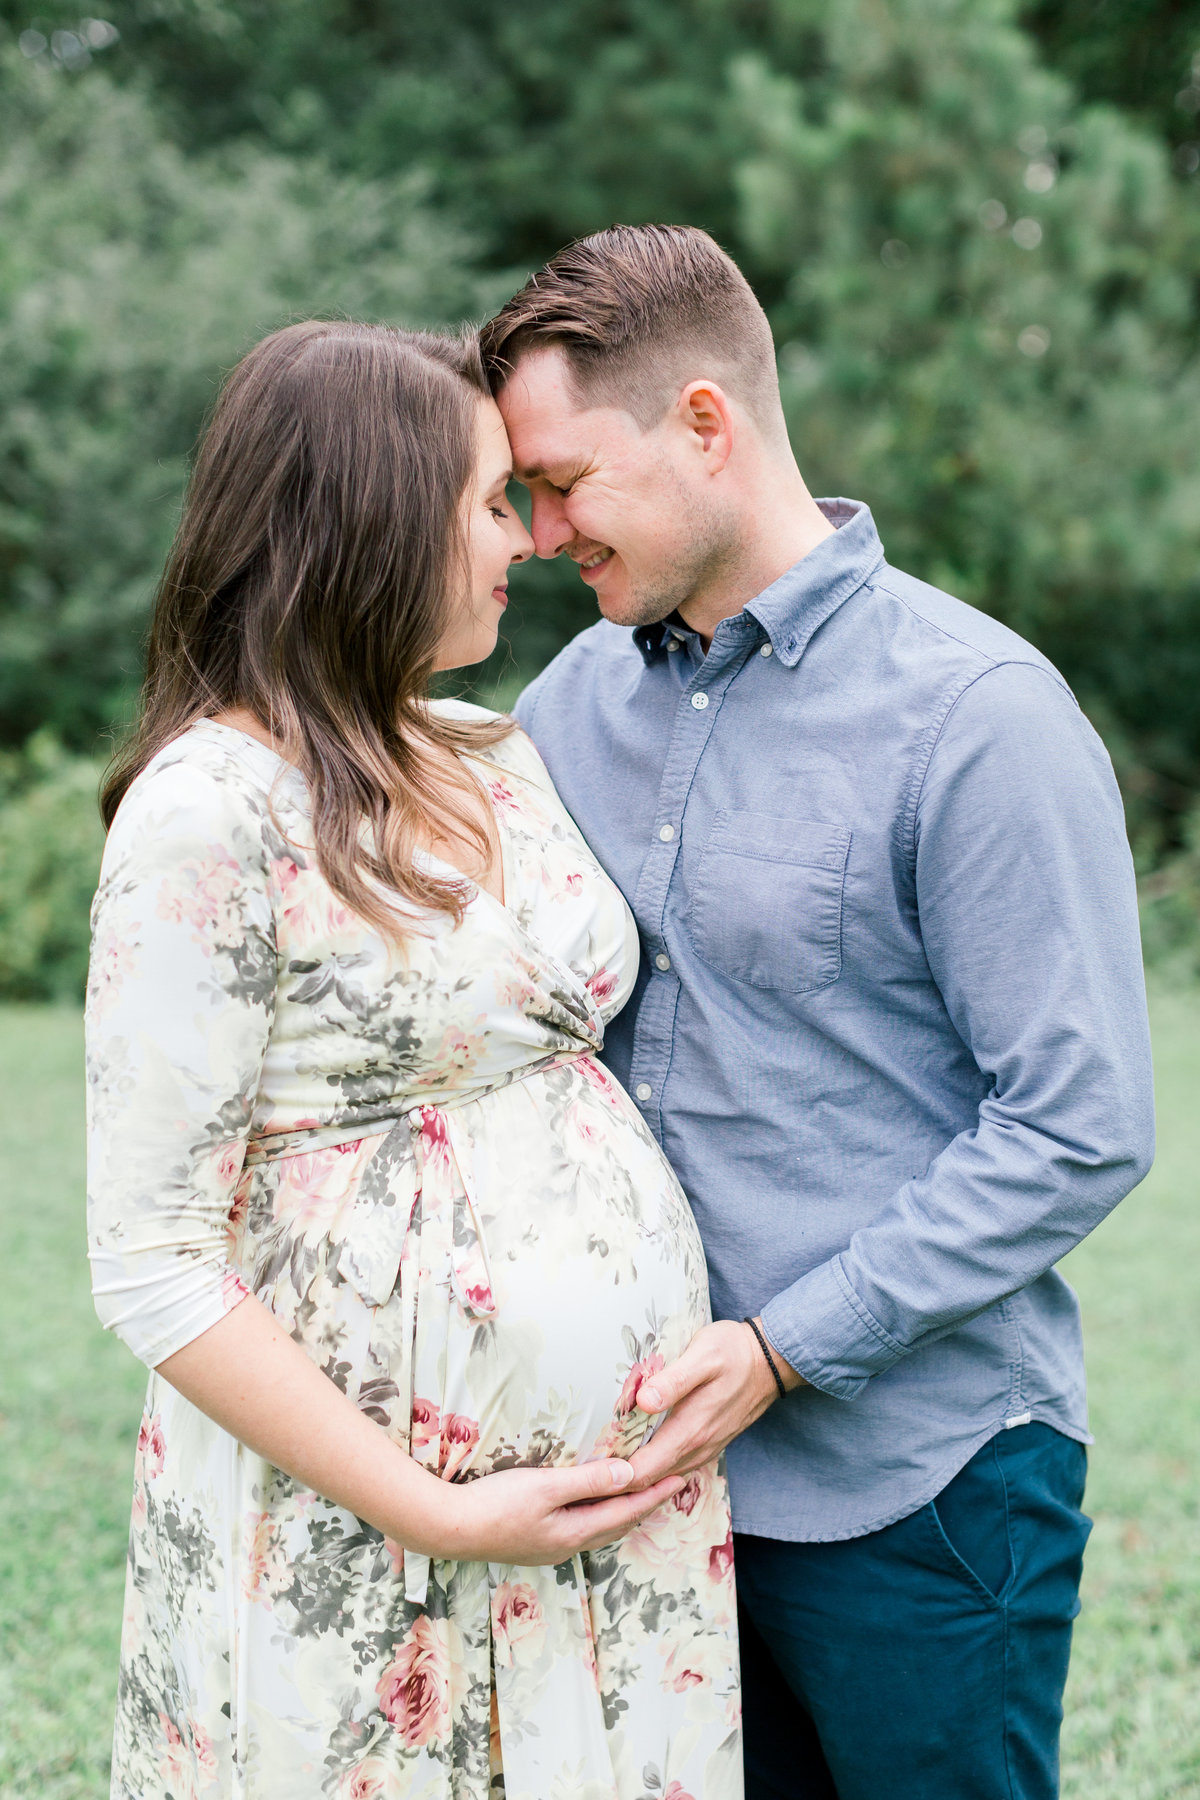 Dave and Emily-Maternity Session-Samantha Laffoon Photography-14